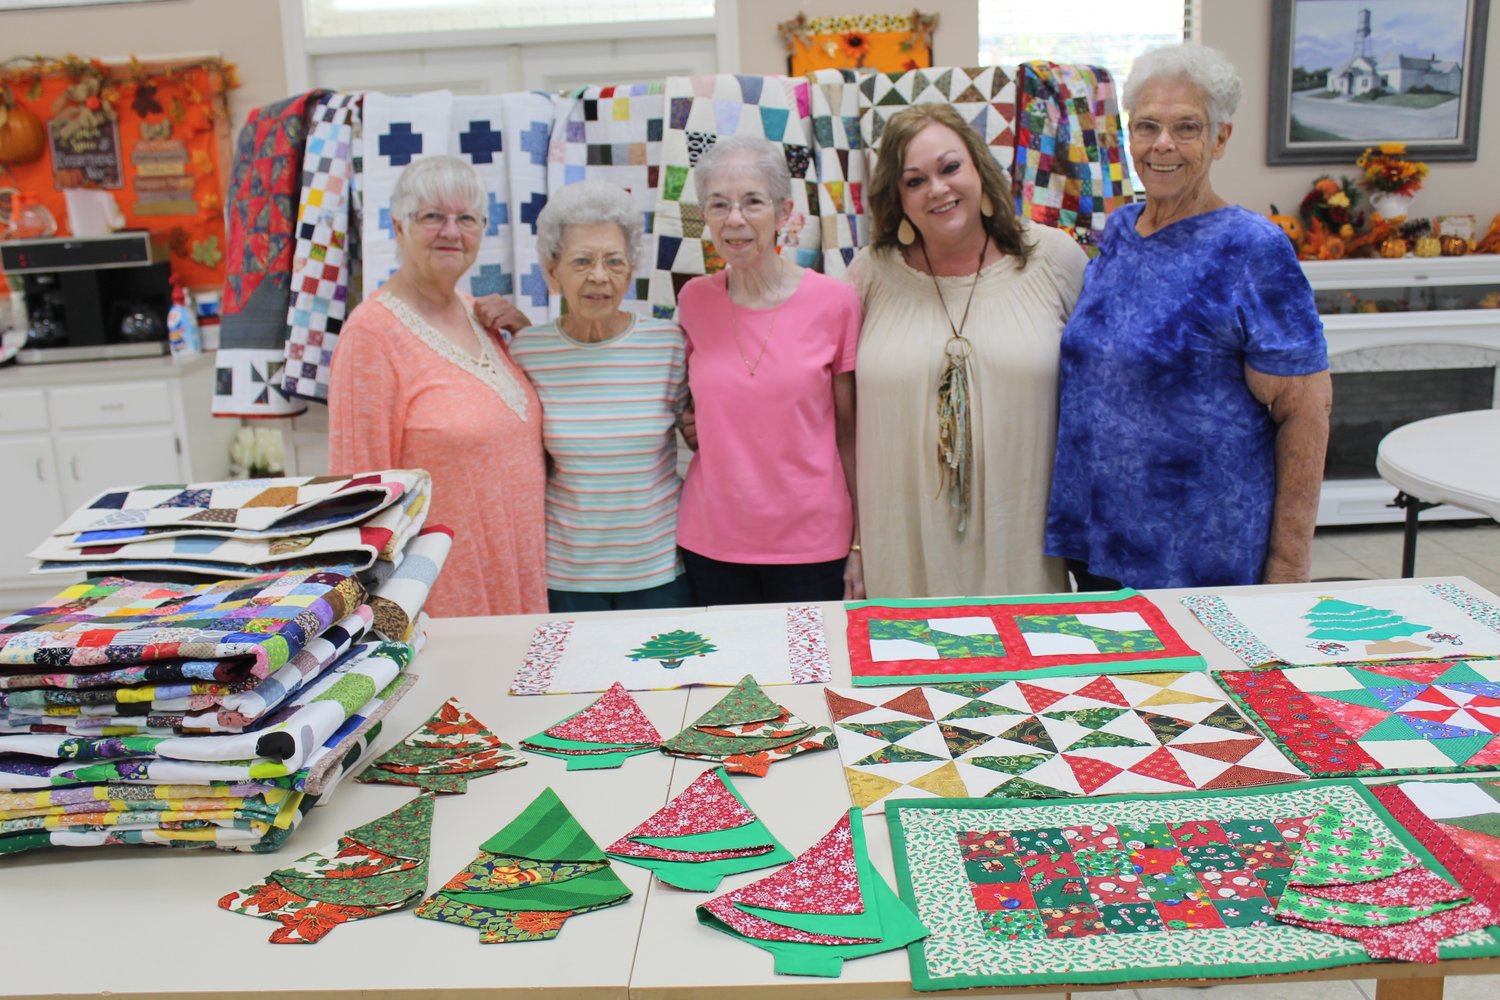 Amy Ochello, senior activities coordinator with the City of Robertsdale, receives a donation of quilts, placemats and napkins from the Sit-N-Sew group of Stitch-N-Friends. Pictured, from left, are Carol Jenks, Bonnie Savell, Pat Hallberg, Ochello and Barbara Landers.